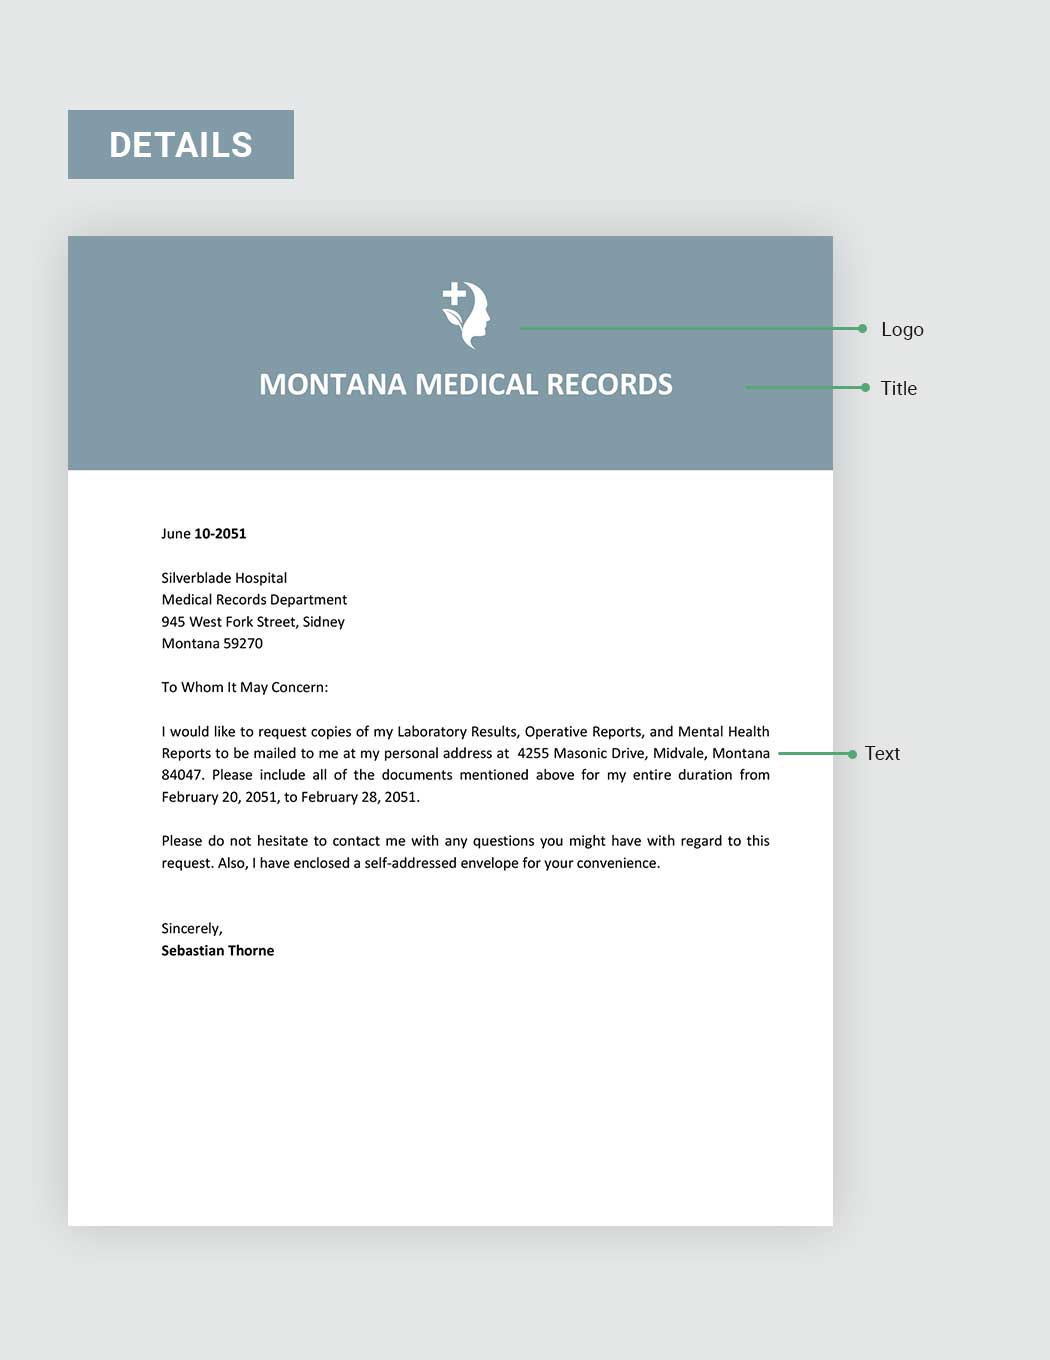 Montana Medical Records Request Template